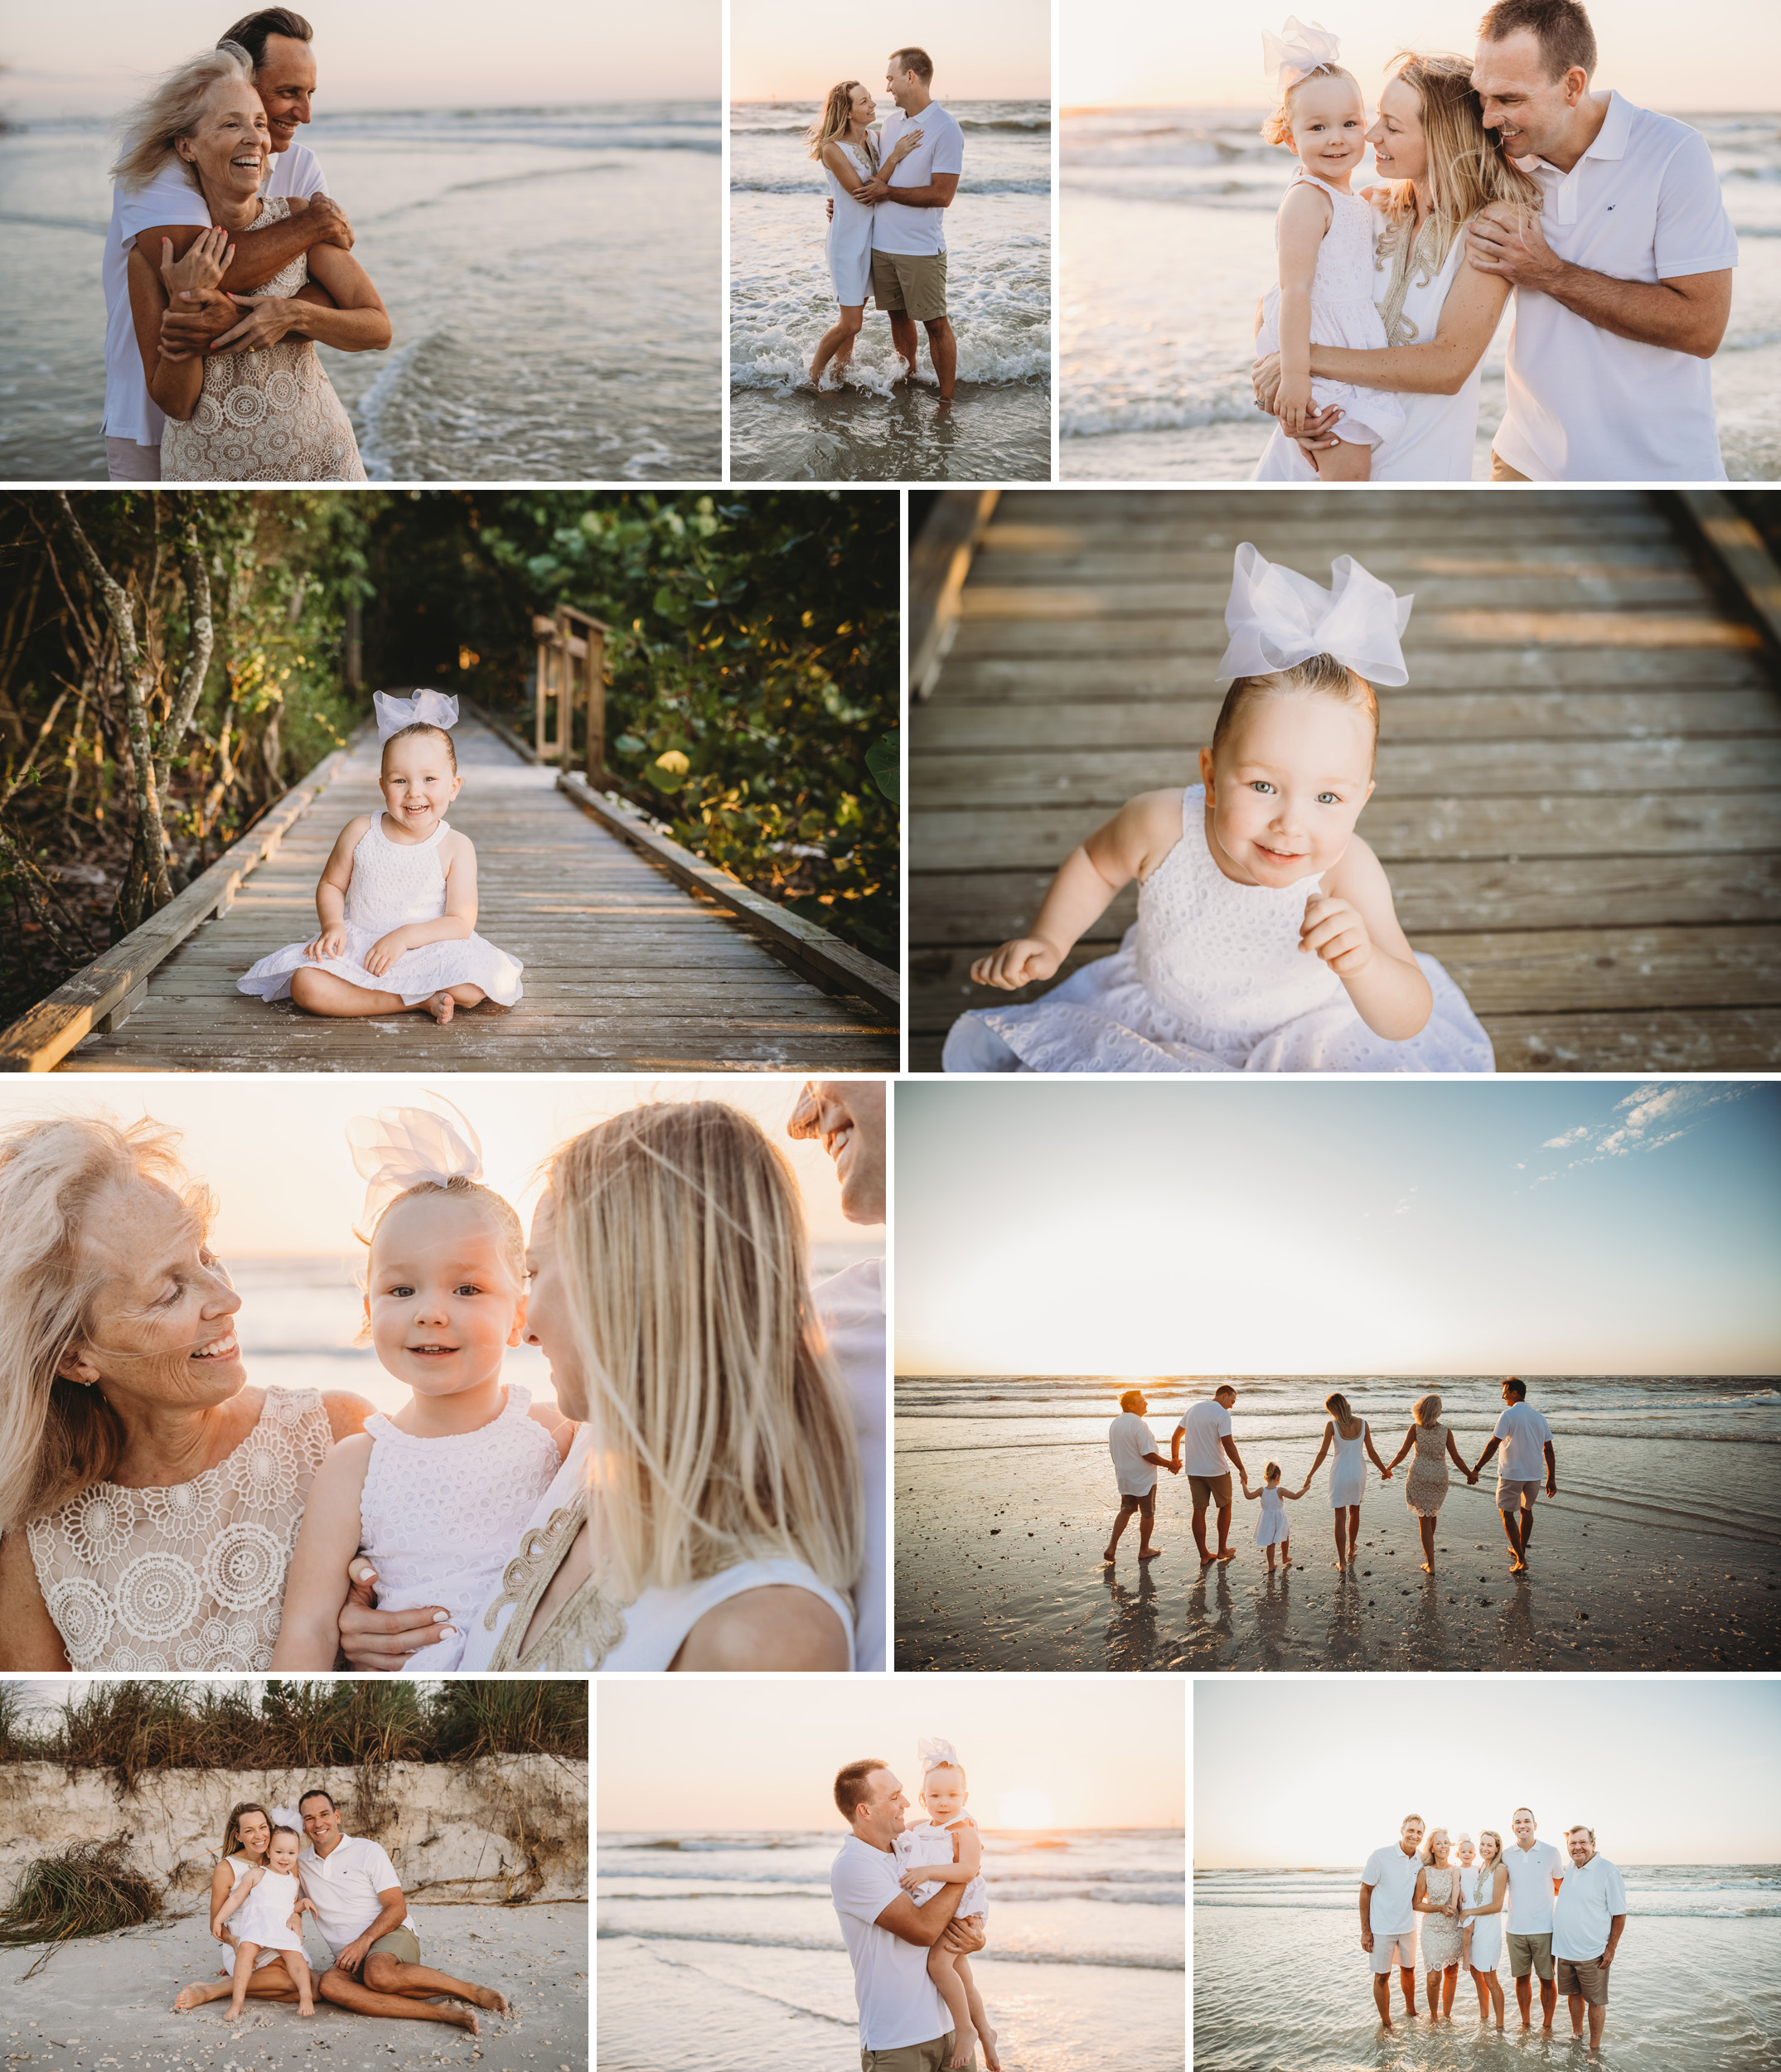 Sunset Photo Session in Naples, Florida